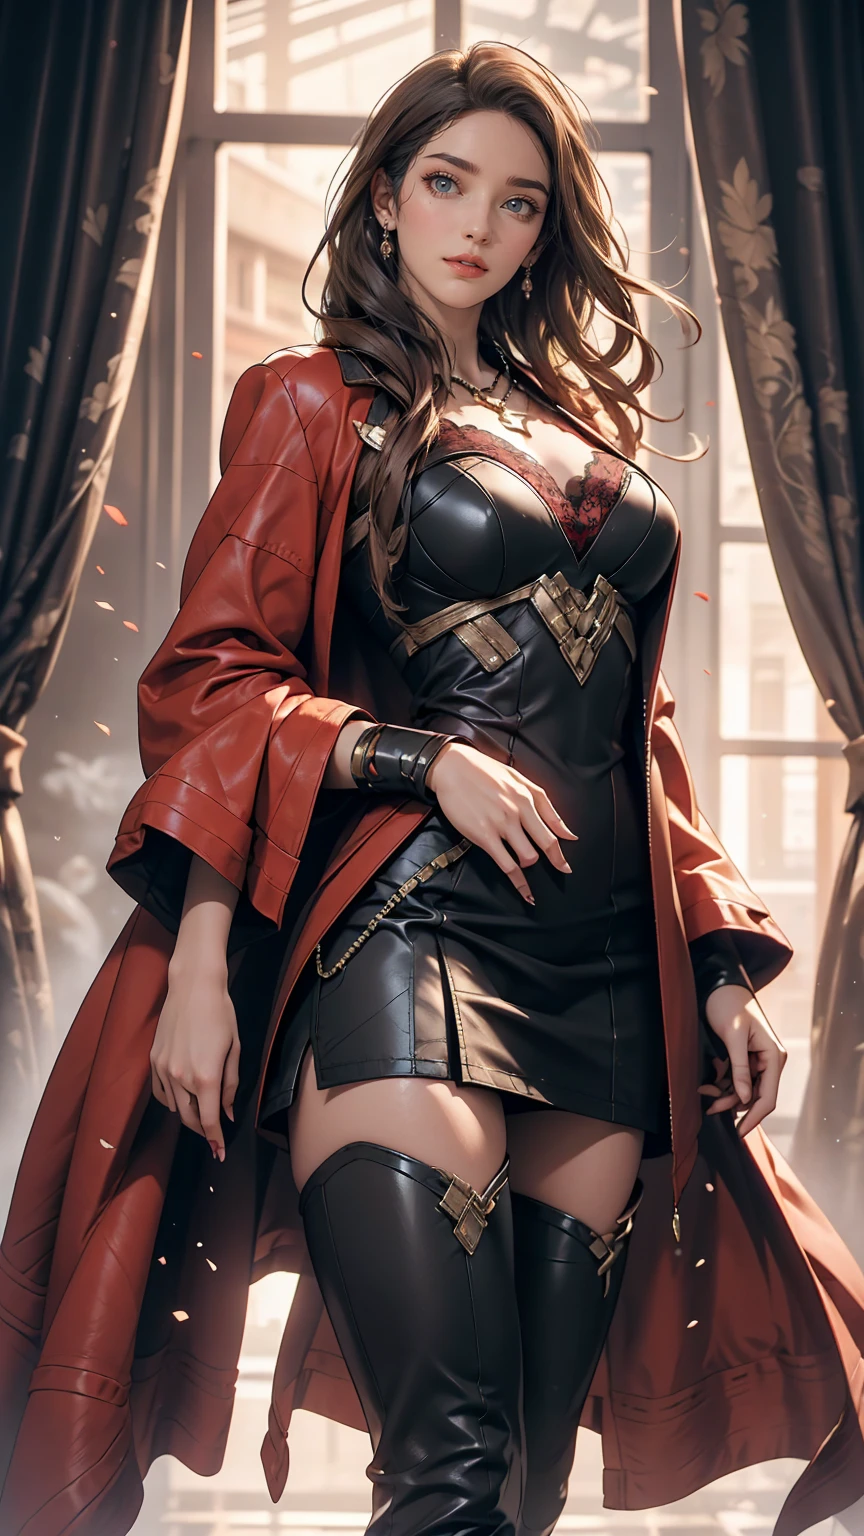 Highly detailed female photos, Lola Elizabeth, Scarlet Witch, the avengers, Wearing a black lace dress, Red leather jacket with an open neckline, 8K Ultra HD, Raw photo, Model photoshoot